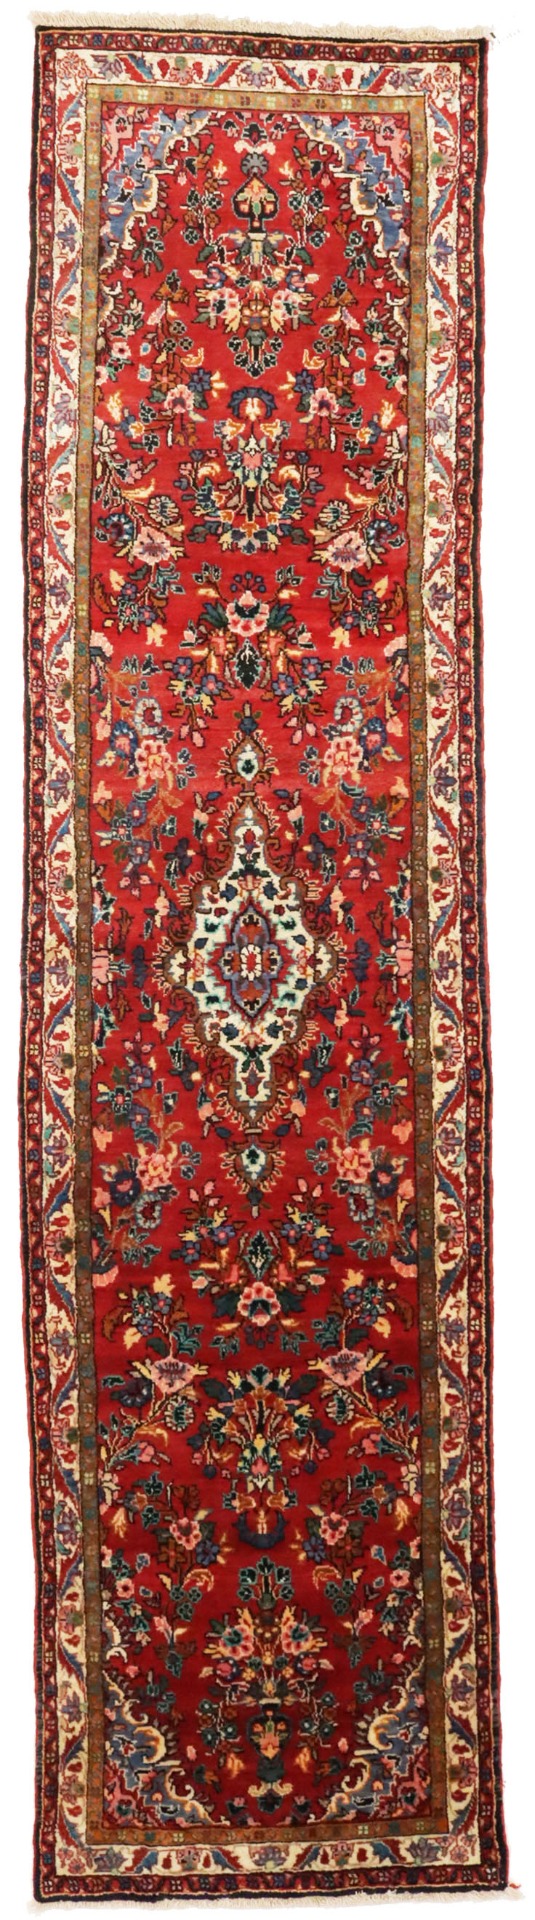 Vintage Red Floral 3X12 Lilian Persian Runner Rug